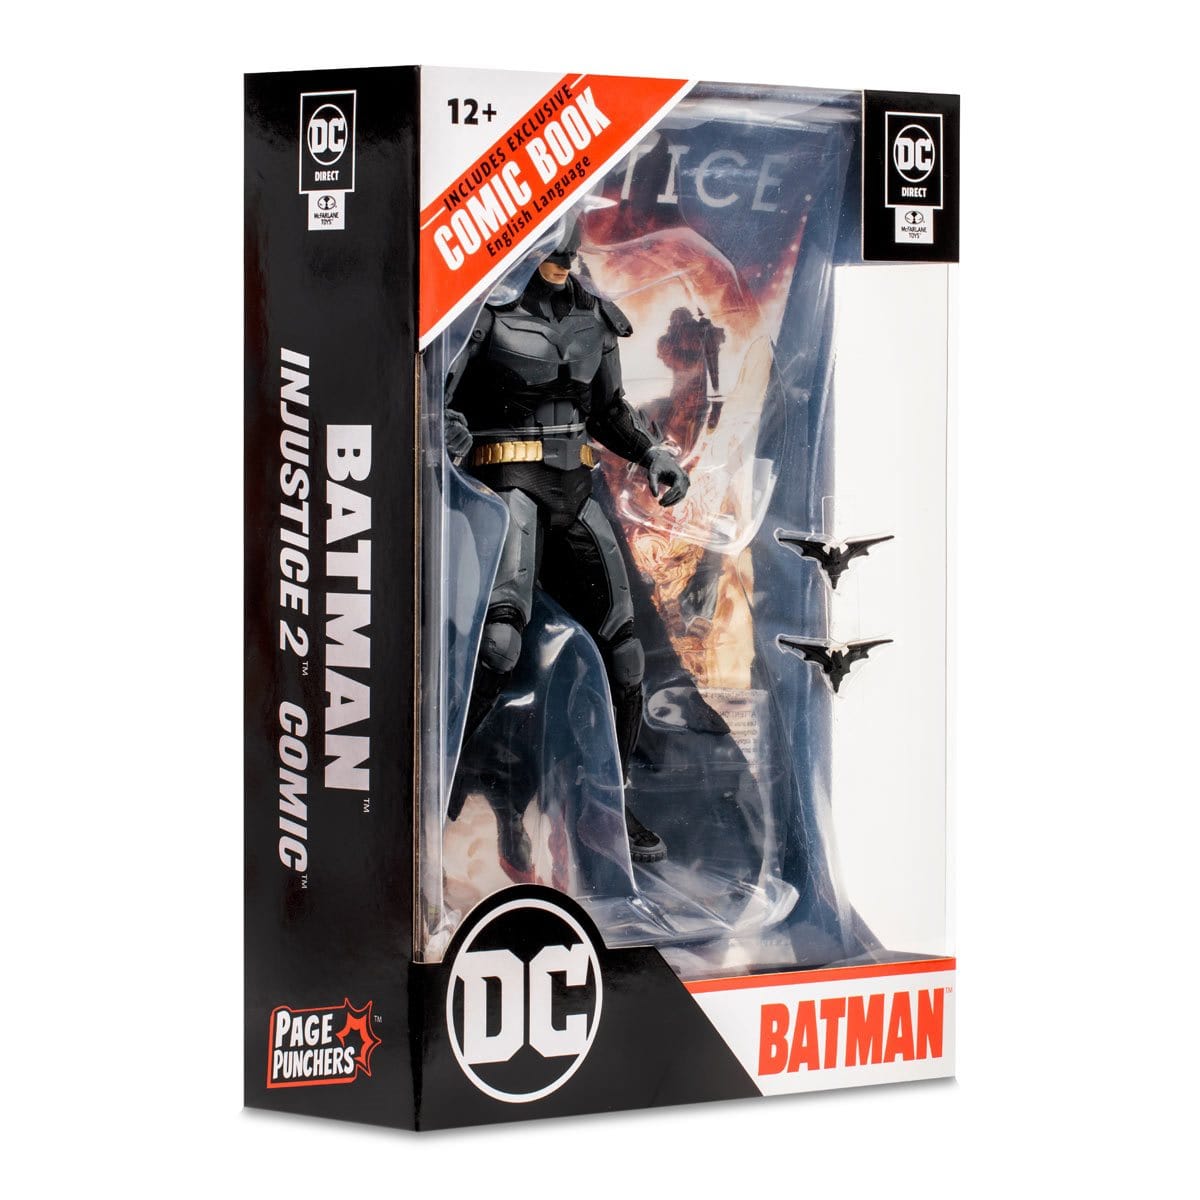 Injustice 2 Batman Page Punchers 7-Inch Scale Action Figure with Injustice Comic Book Side